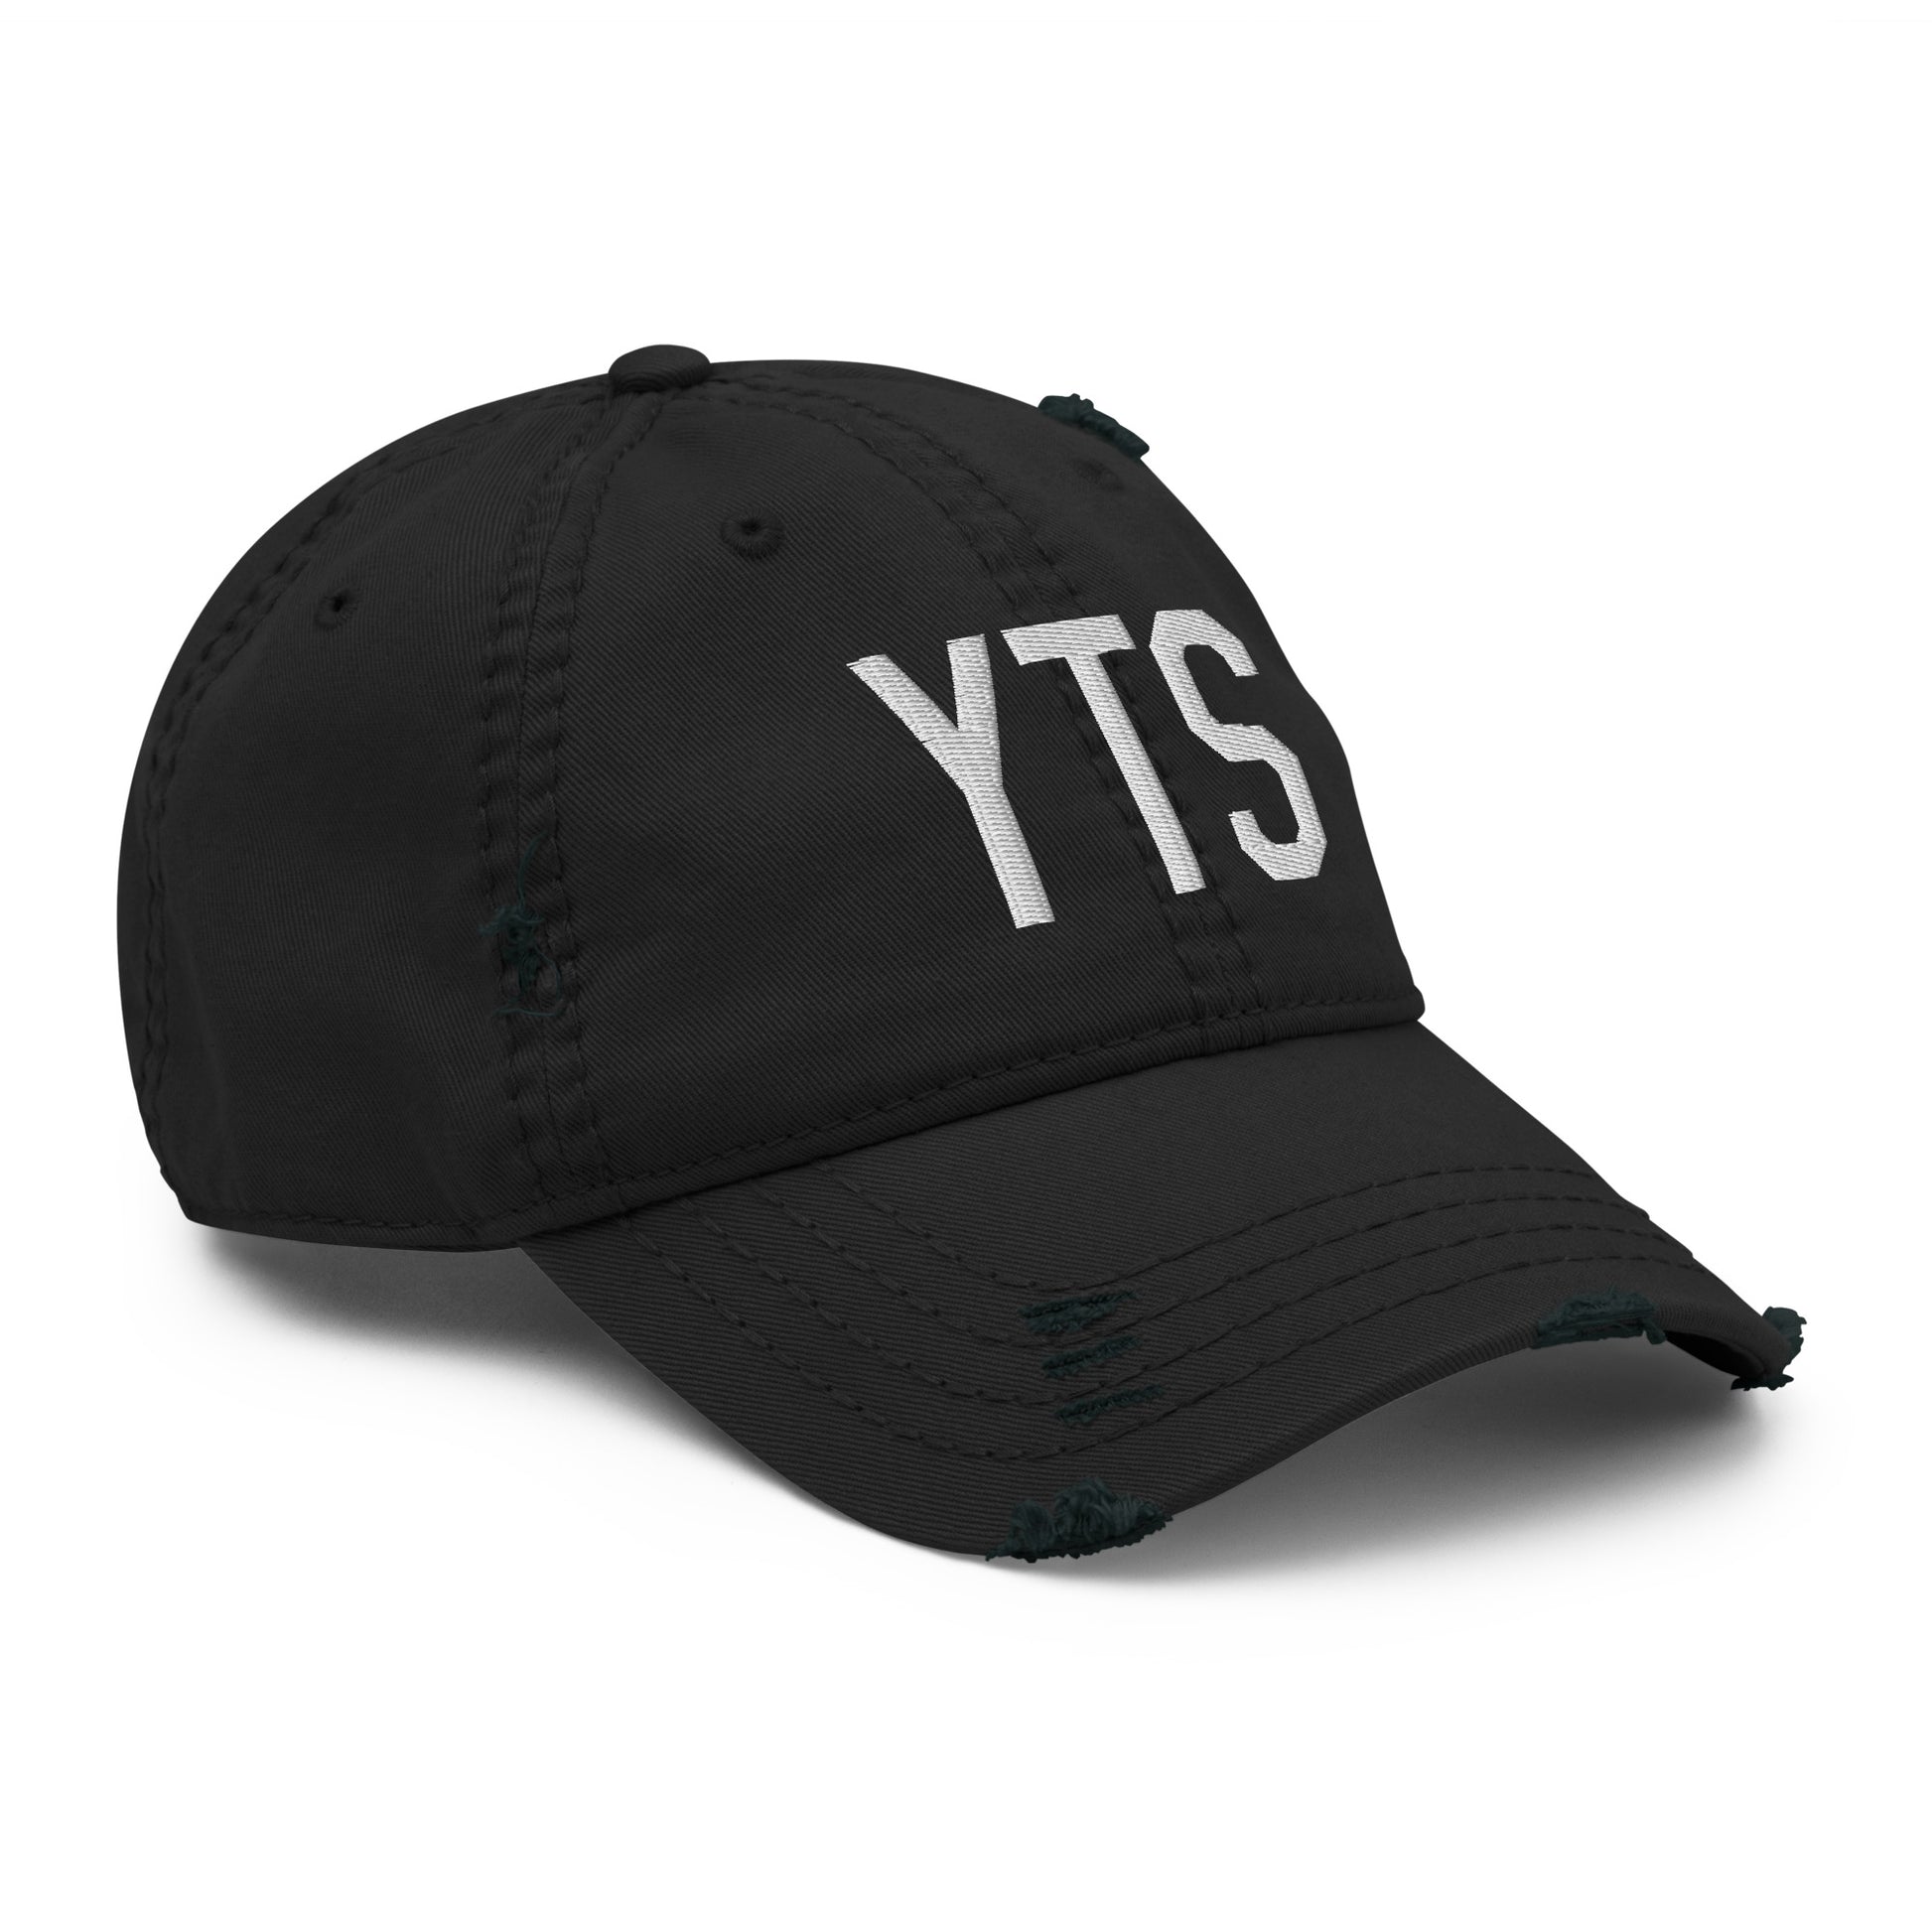 Airport Code Distressed Hat - White • YTS Timmins • YHM Designs - Image 12